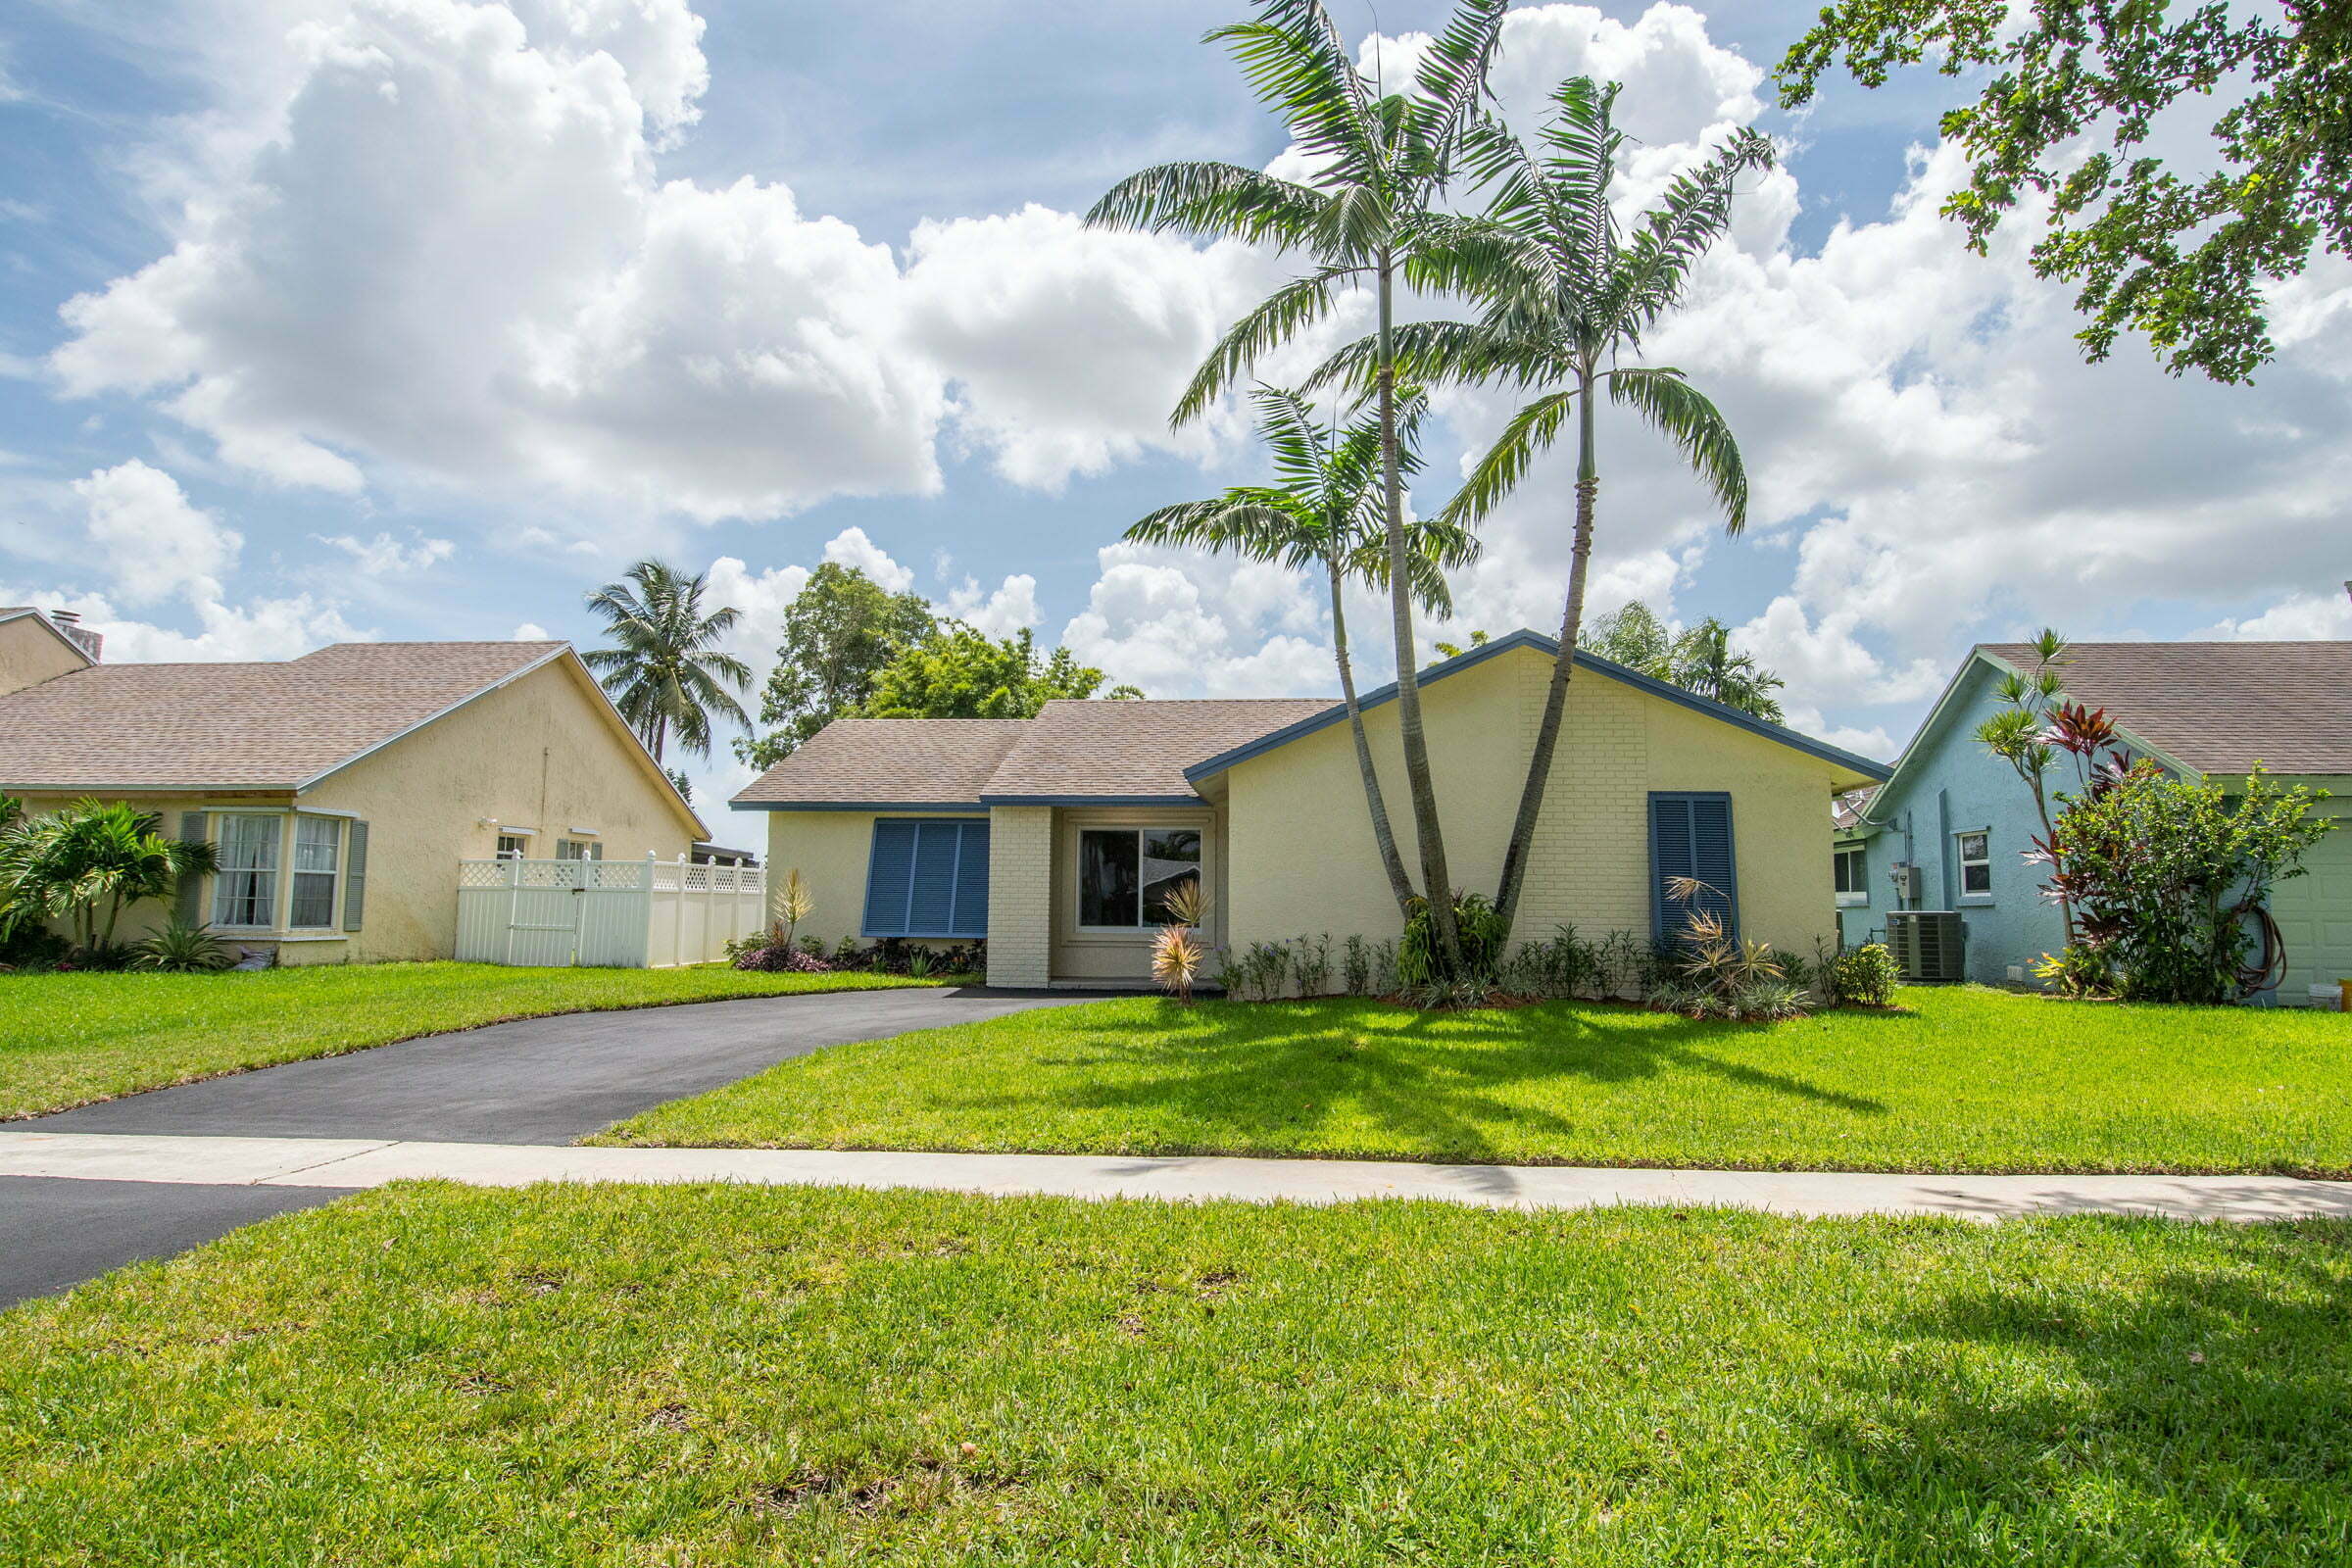 House Front (a) for 3540 NW 117th Lane, Sunrise, FL 33323 - © Flat Fee Florida Realty